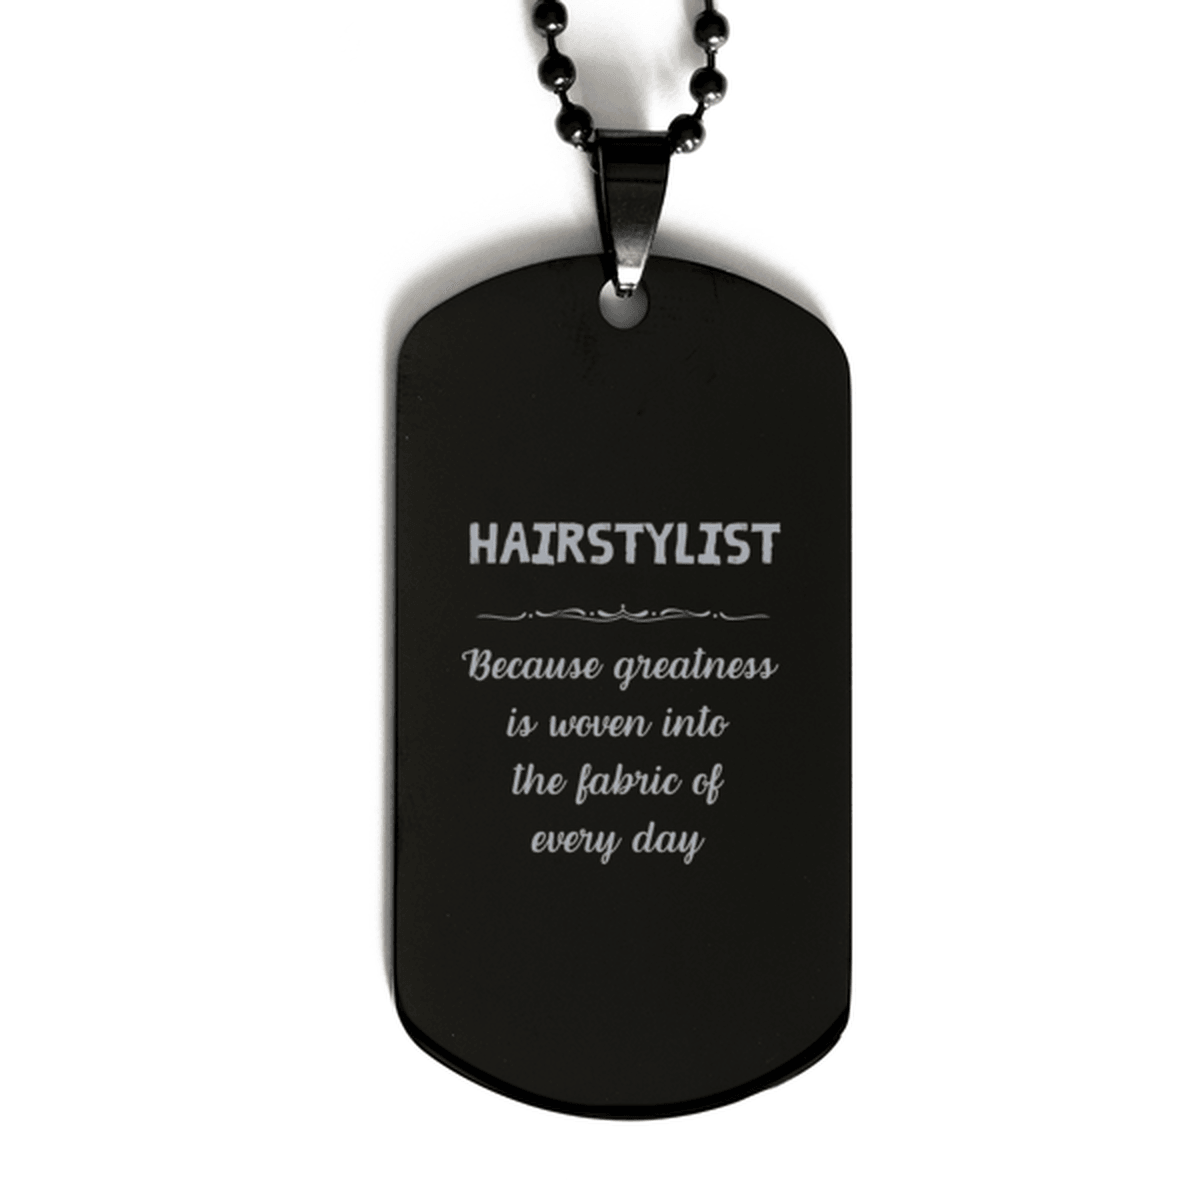 Sarcastic Hairstylist Black Dog Tag Gifts, Christmas Holiday Gifts for Hairstylist Birthday, Hairstylist: Because greatness is woven into the fabric of every day, Coworkers, Friends - Mallard Moon Gift Shop